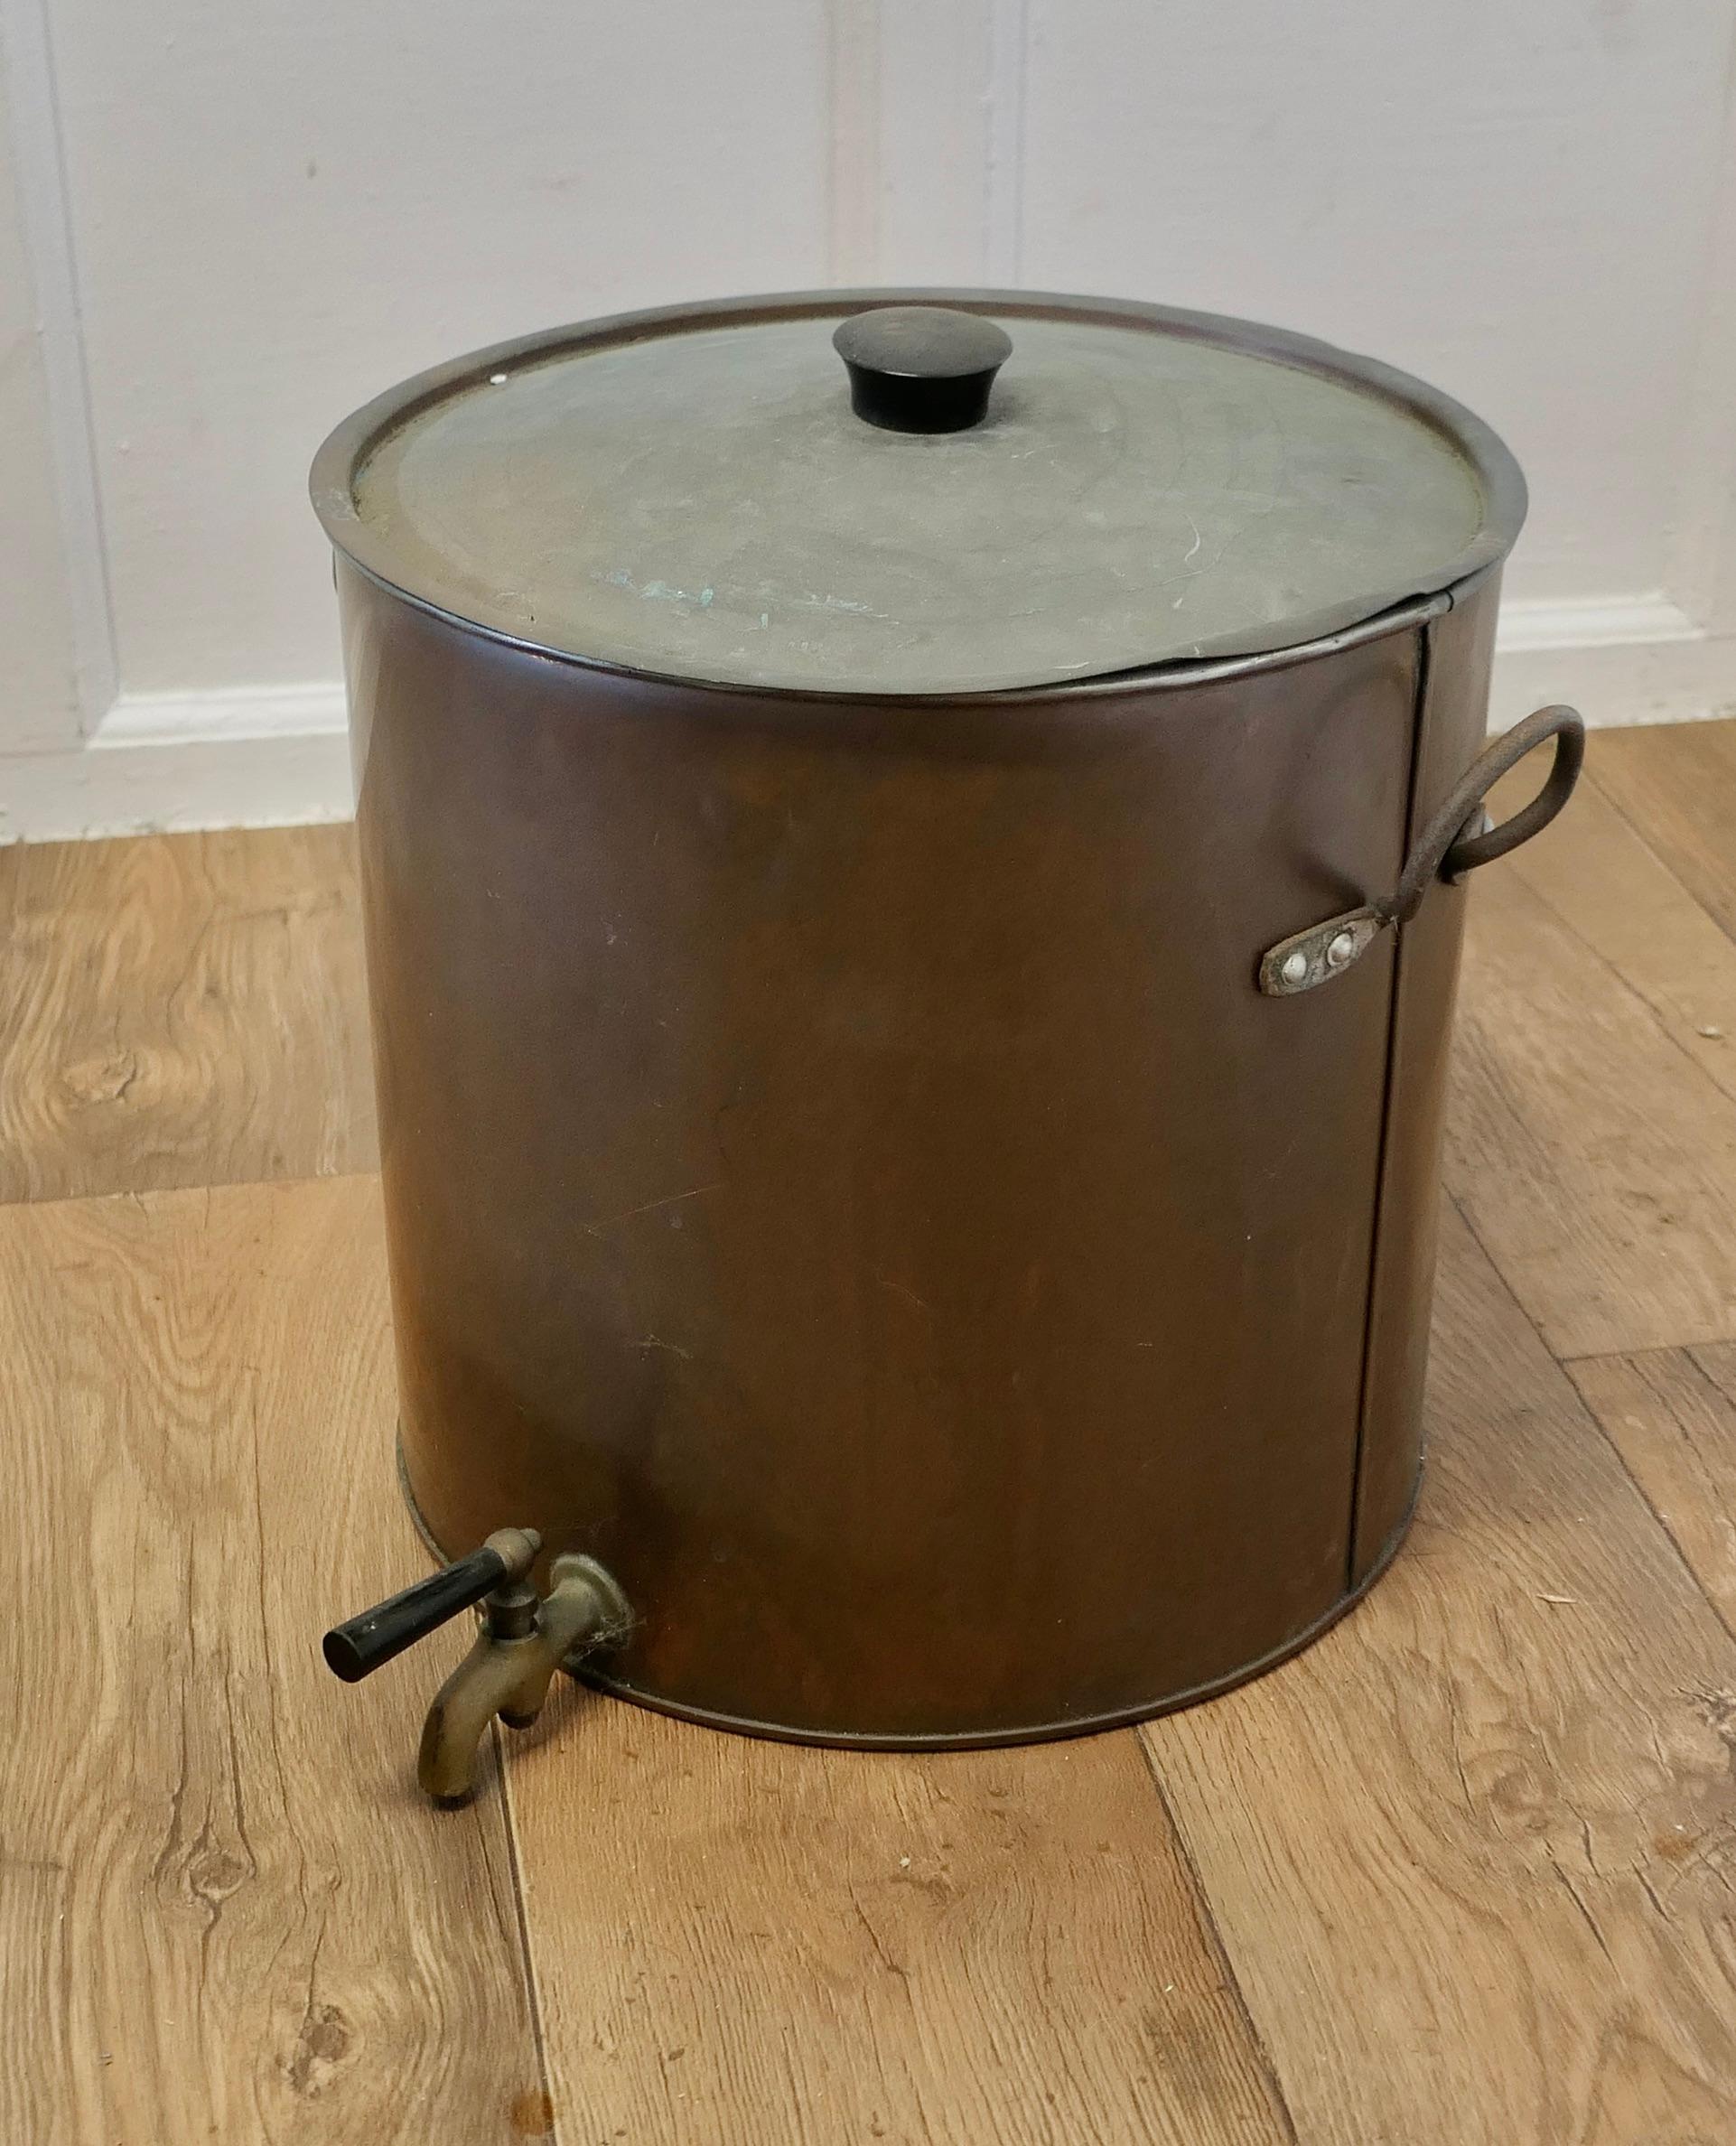 Kitchen Range Copper Hot Water Urn Samovar

This very practical piece has been tinned inside the Copper body with brass banding, iron handles it has a copper lid and a brass tap 
In good original condition, decorative, ideal for display or storage